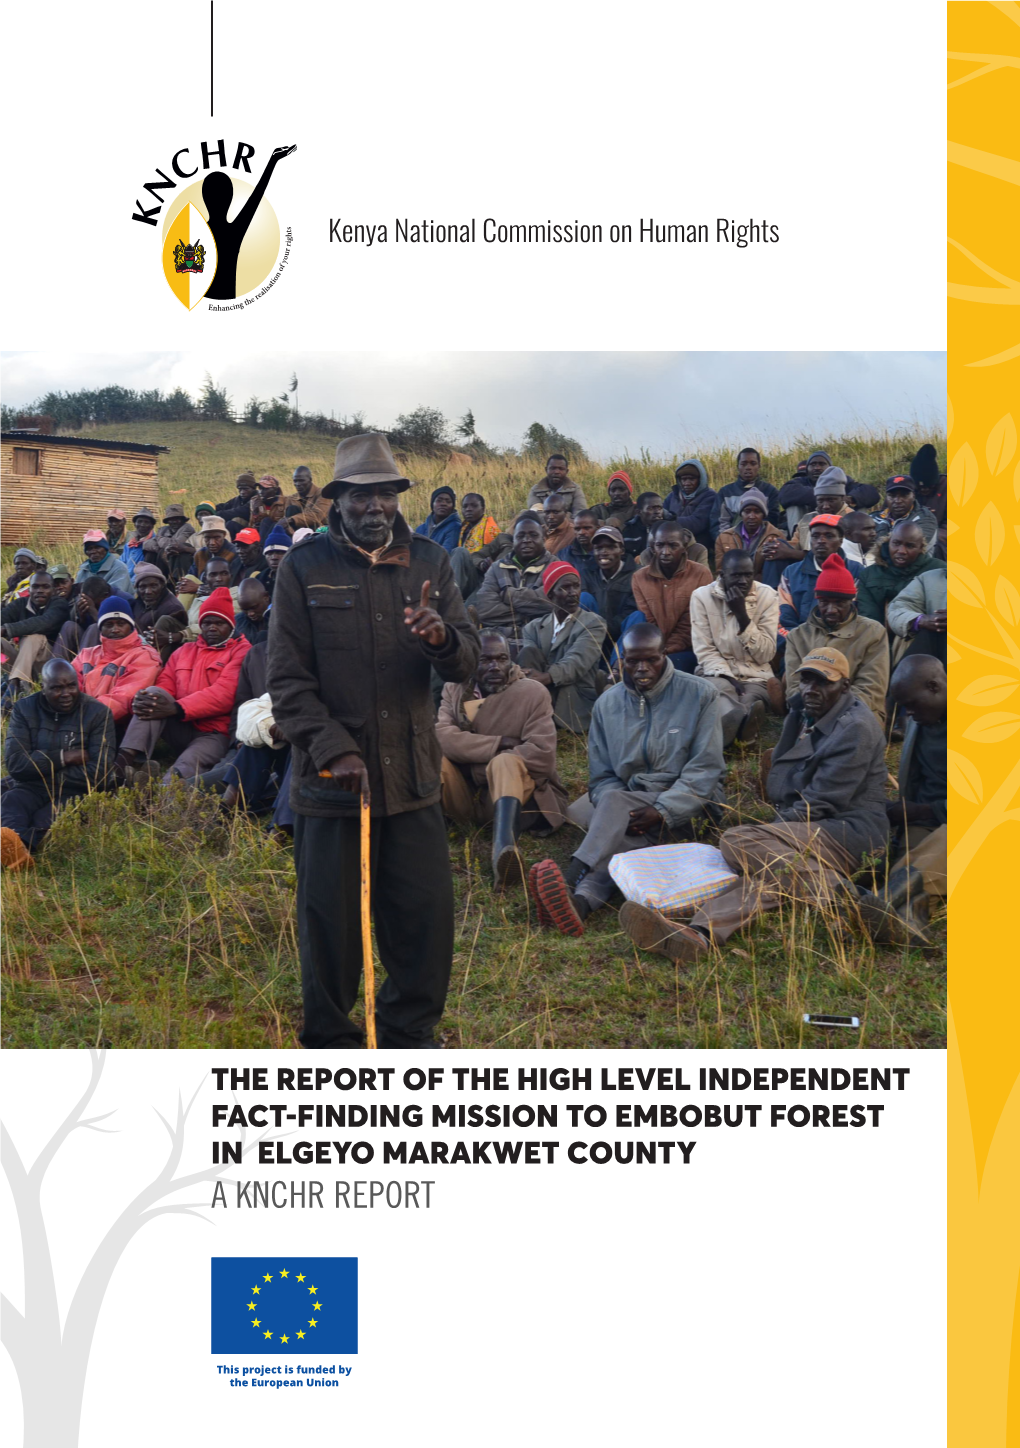 A Knchr Report